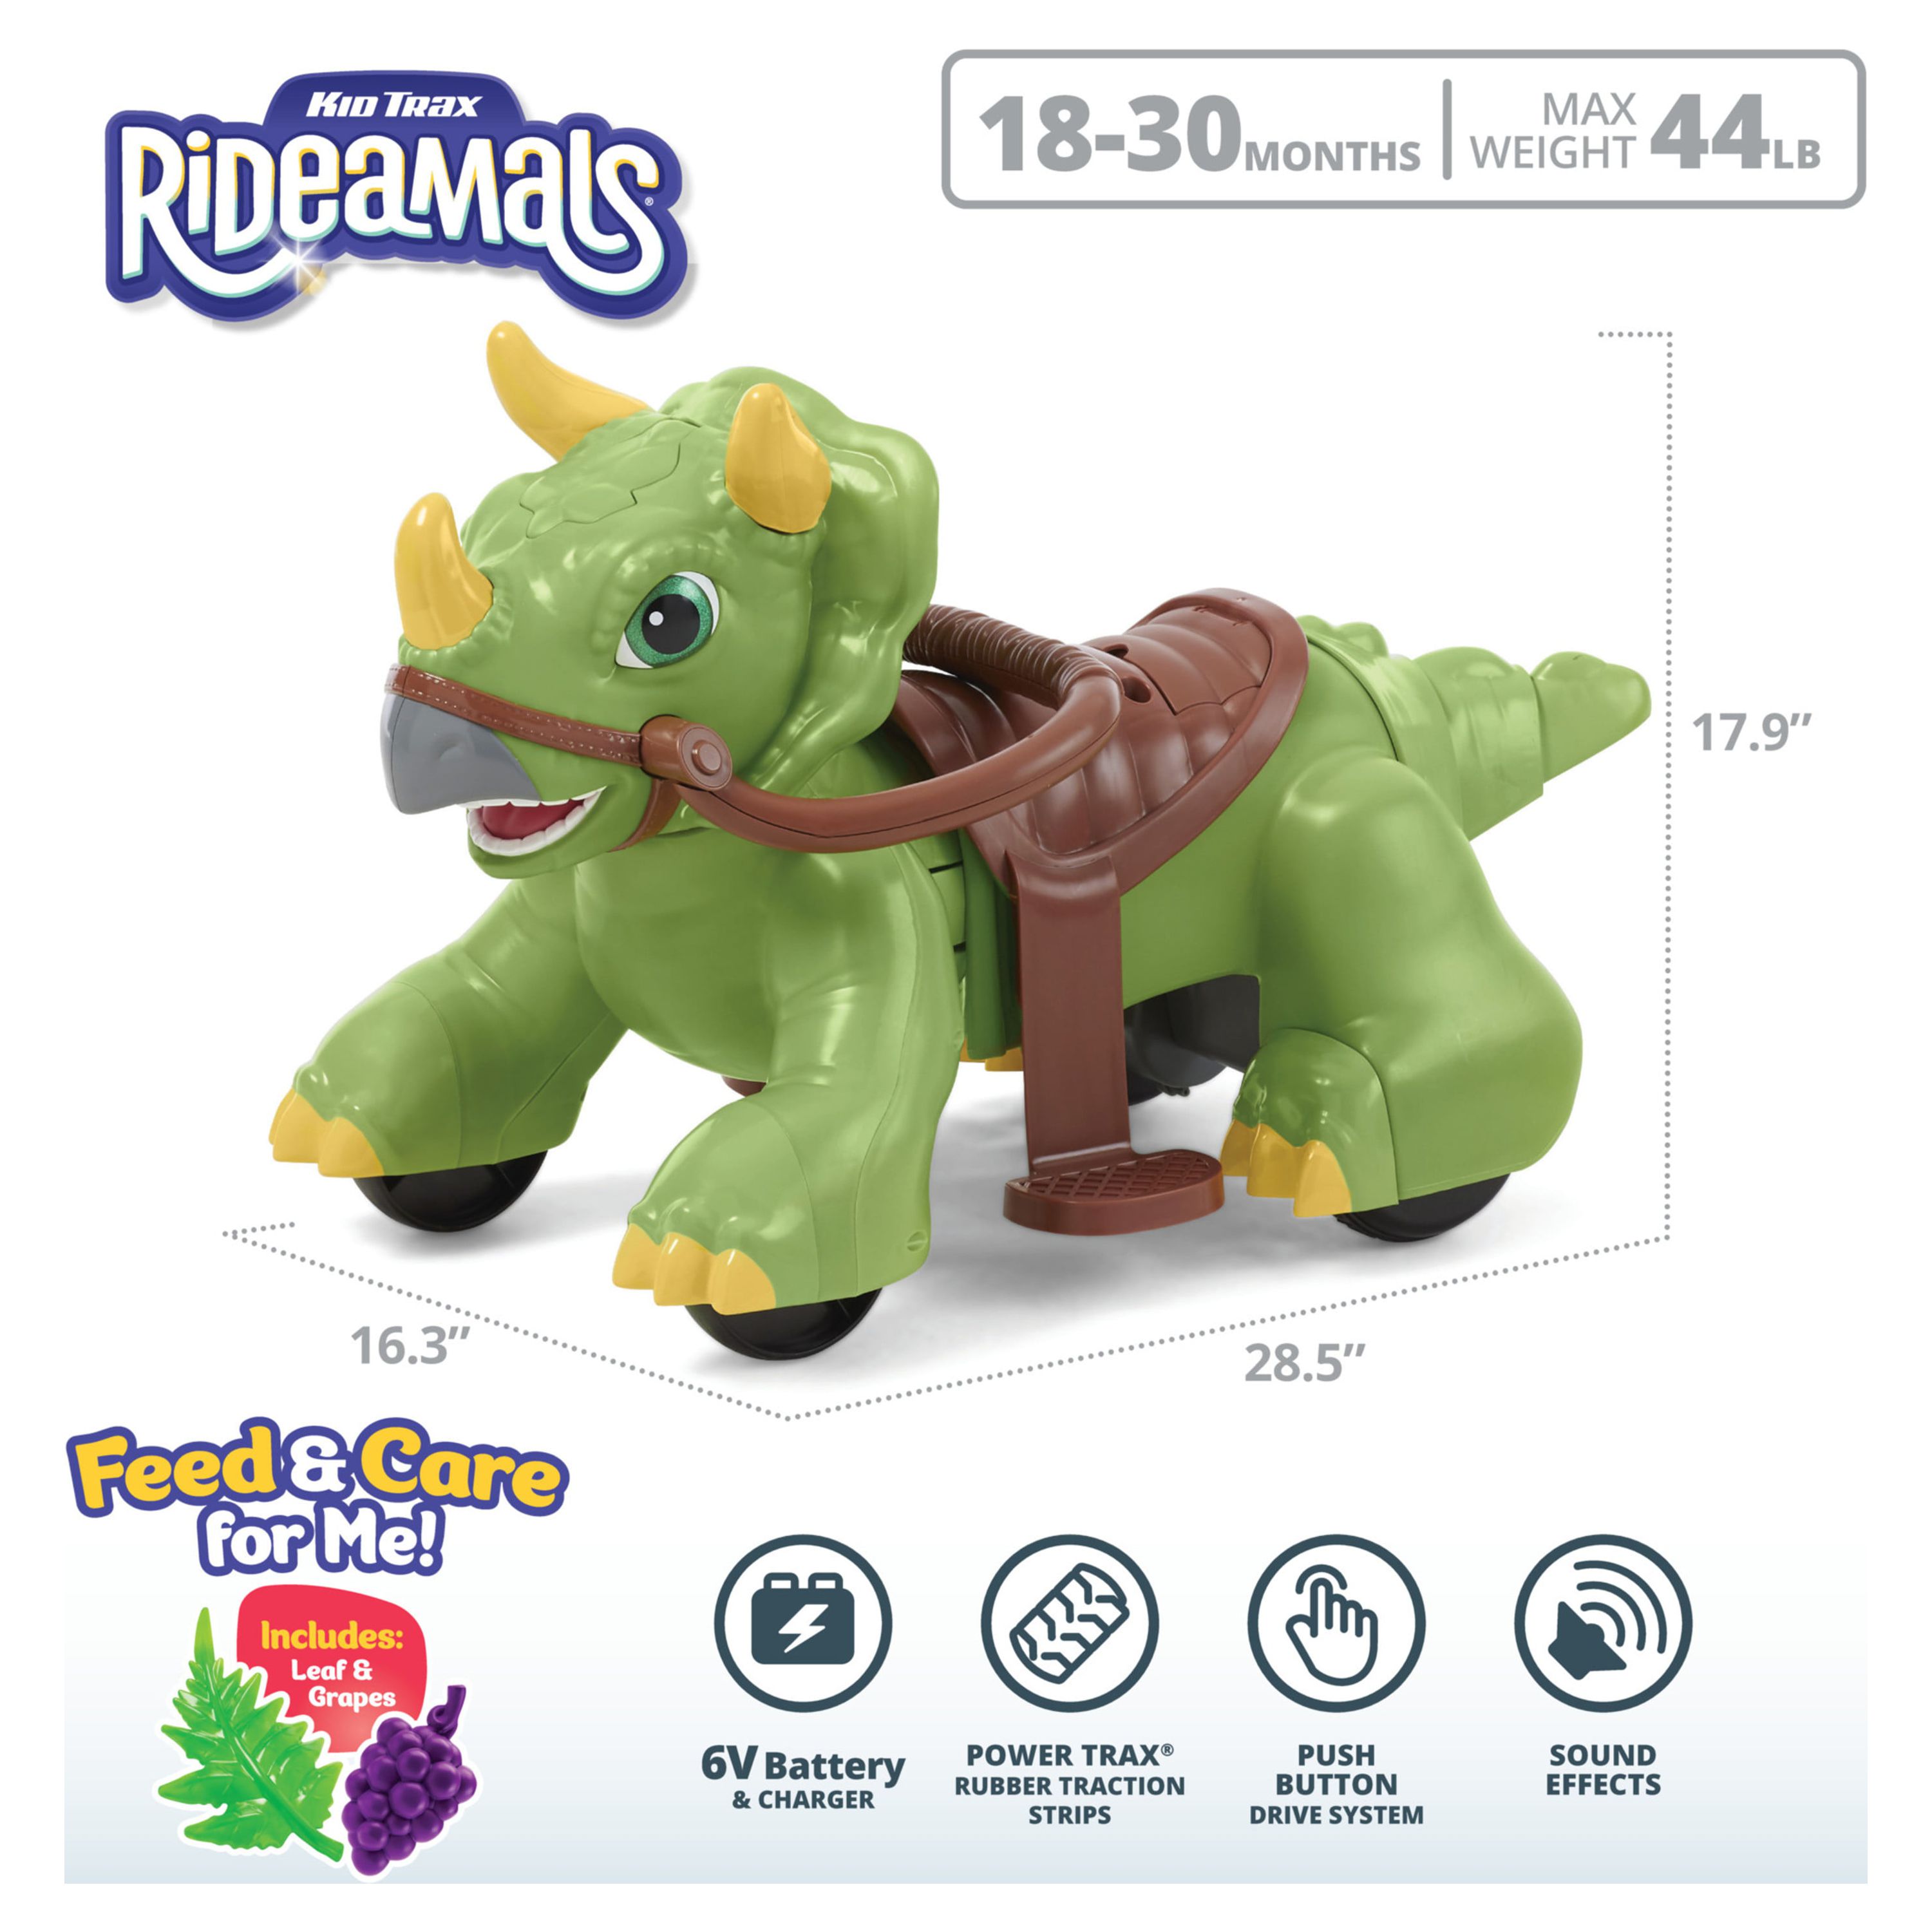 Rideamals Dinosaur Ride-On Toy by Kid Trax, powered rechargeable toddler, boys or girls, toddler - image 3 of 10